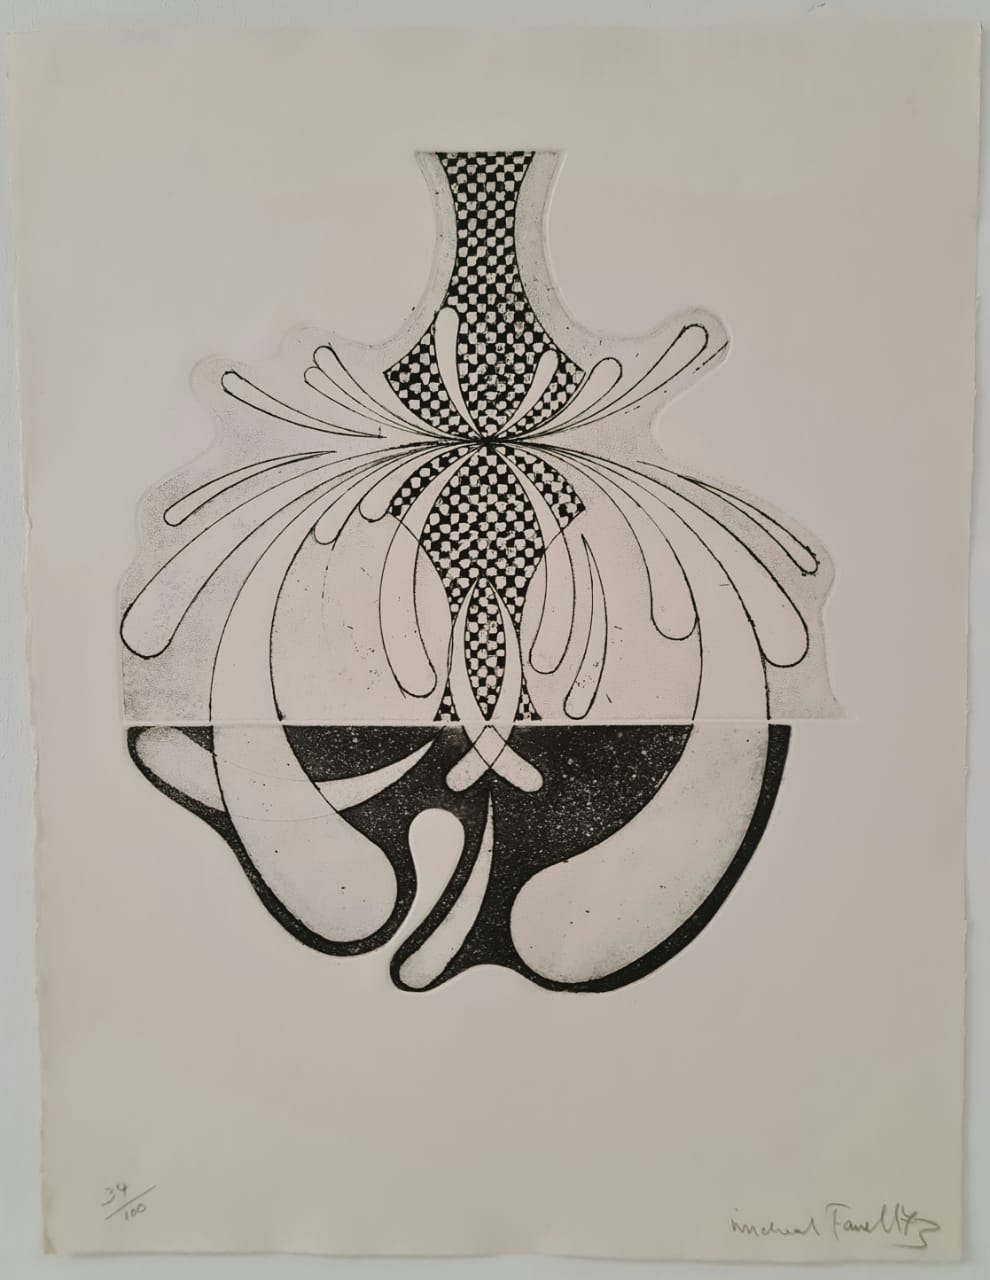 Micheal Farrell, Untitled, 1973, Etching, 64.5 x 49.5 cm, Edition 34 of 100, 150.- Eur